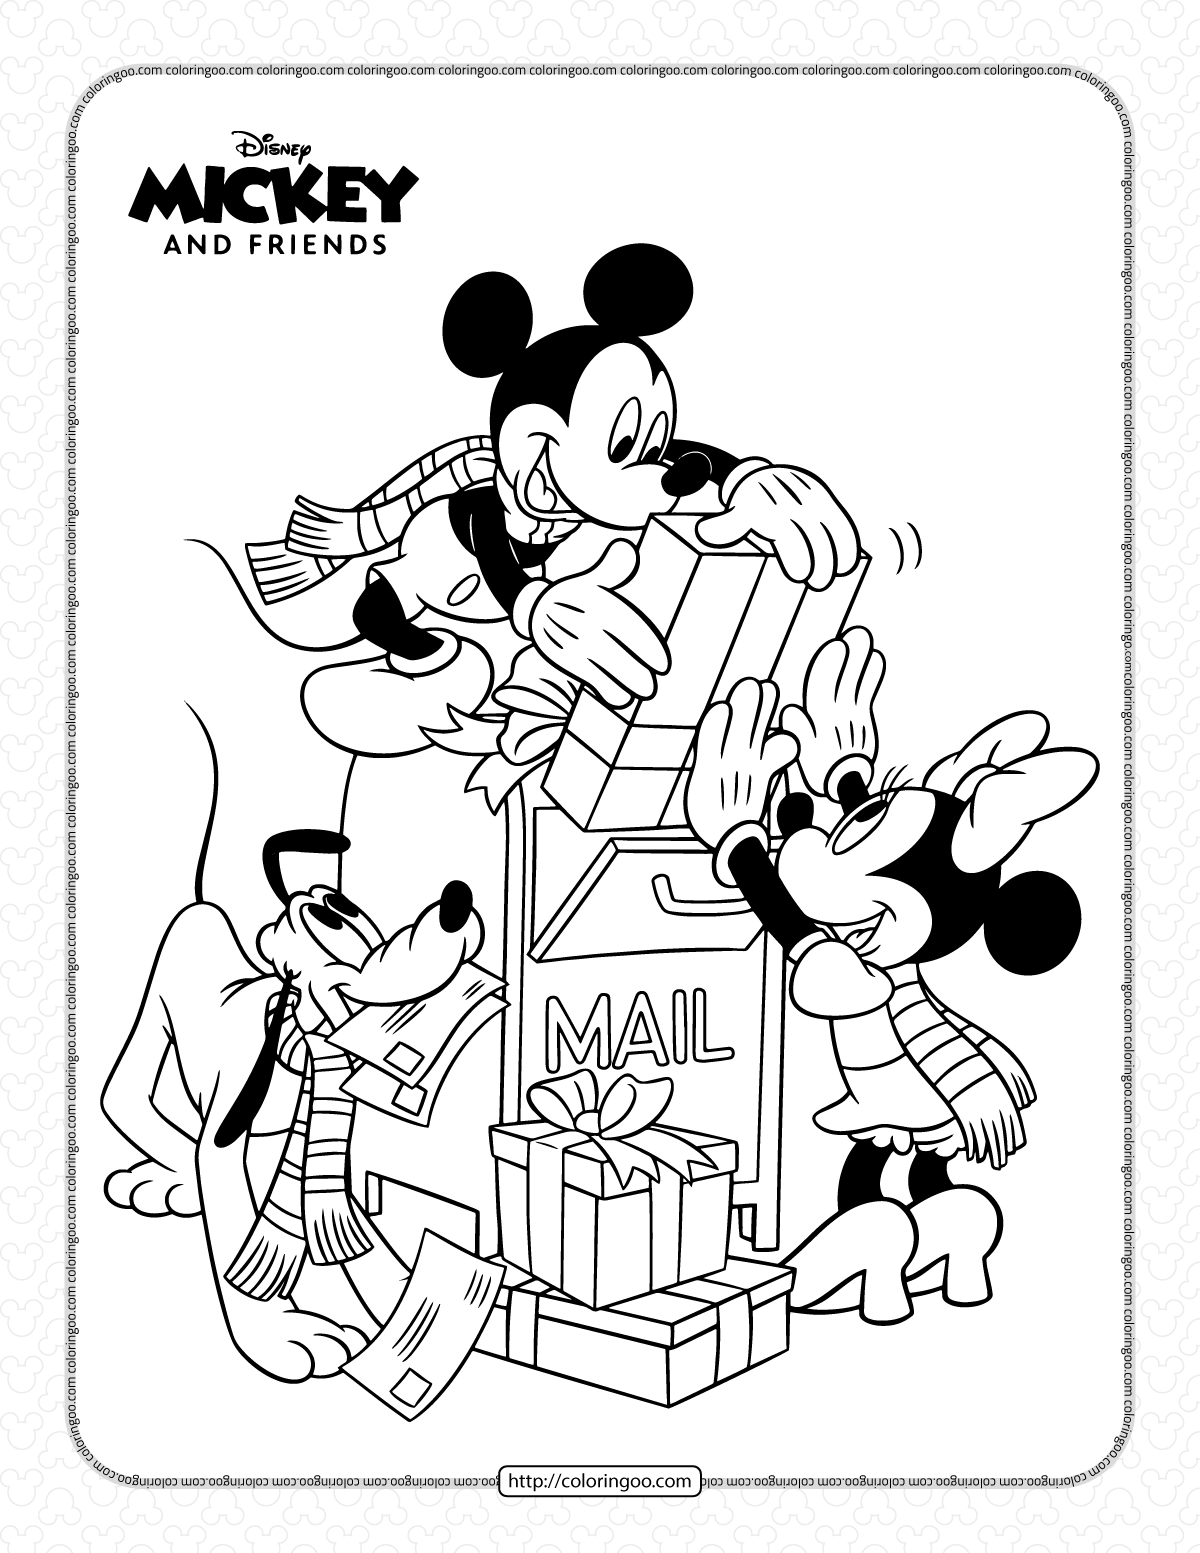 disney mickey and friends coloring pages